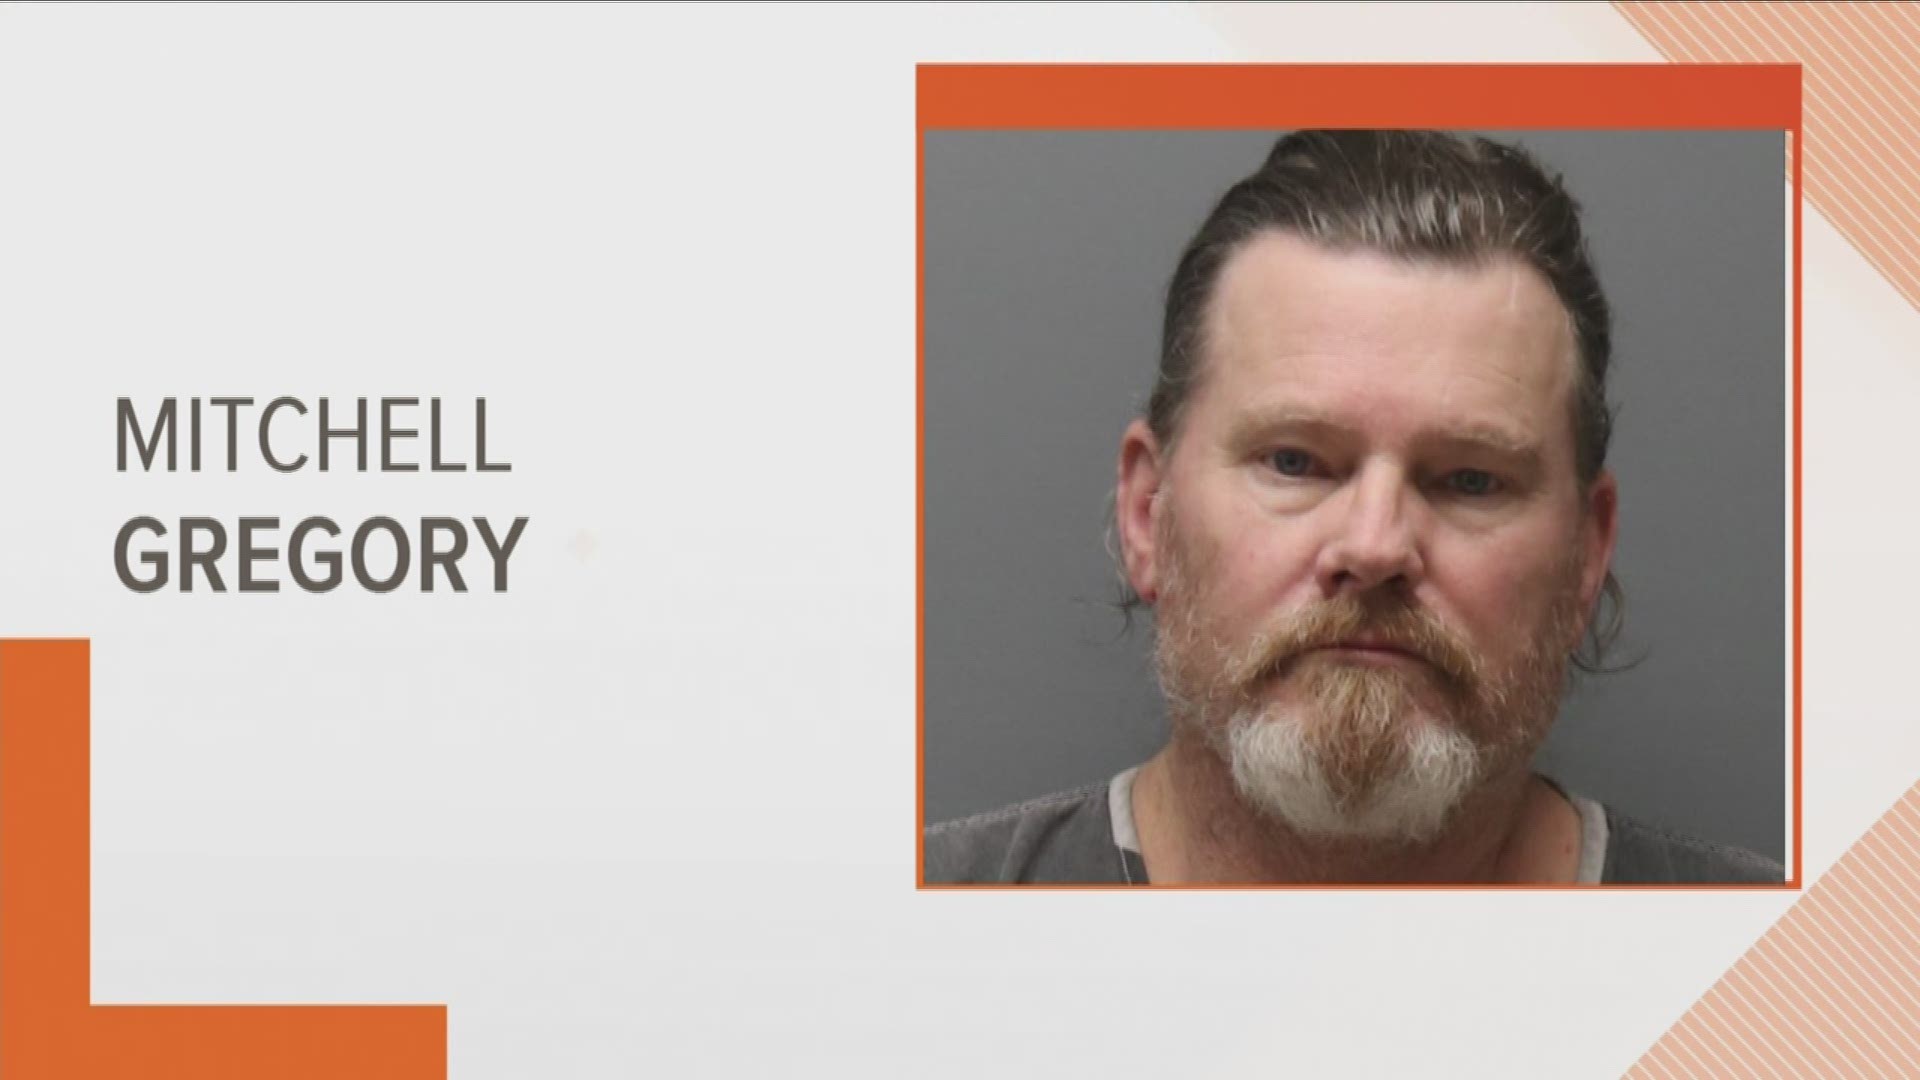 Mitchell Gregory, 57, was arrested Monday after he was identified as the attacker in a stabbing on North Broadway Friday night, according to police.